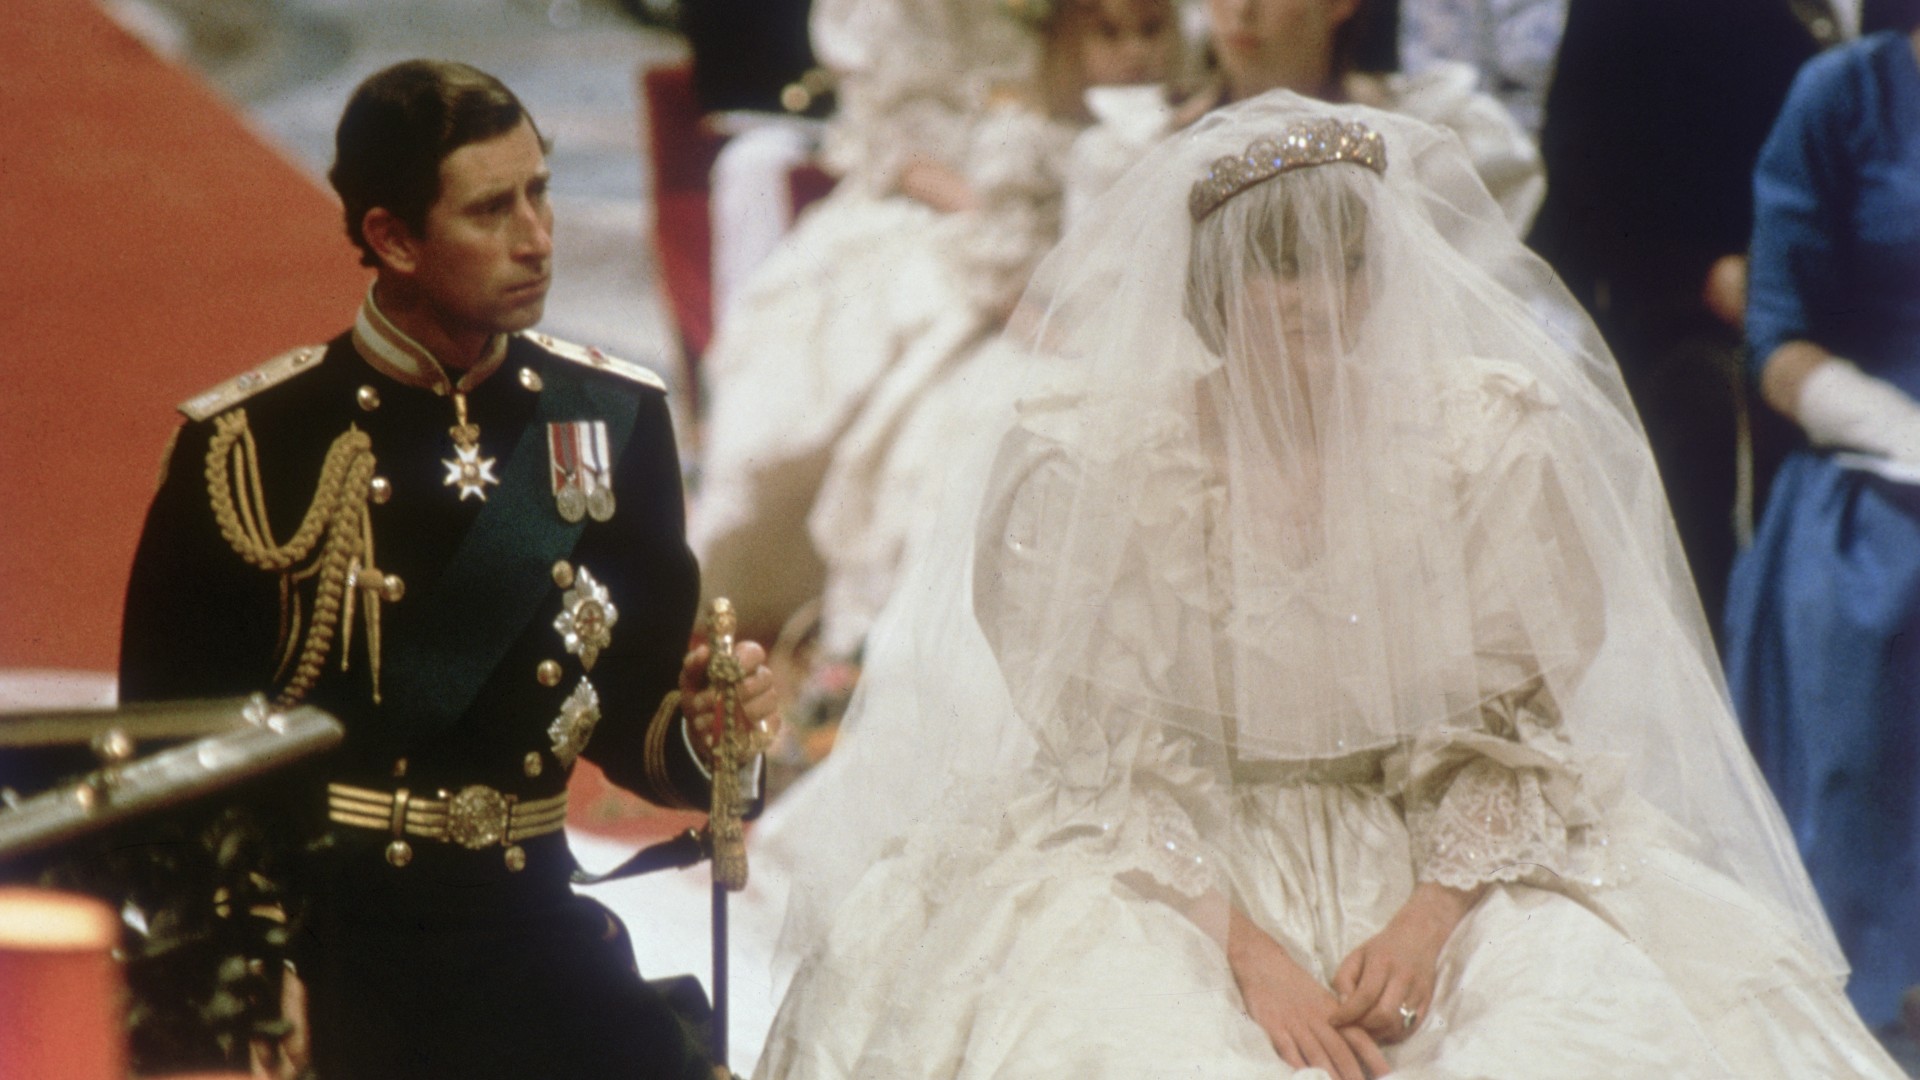 Prince Charles Confessed to Princess Diana the Night Before Their Wedding That He Didn’t Love Her, Friend Says